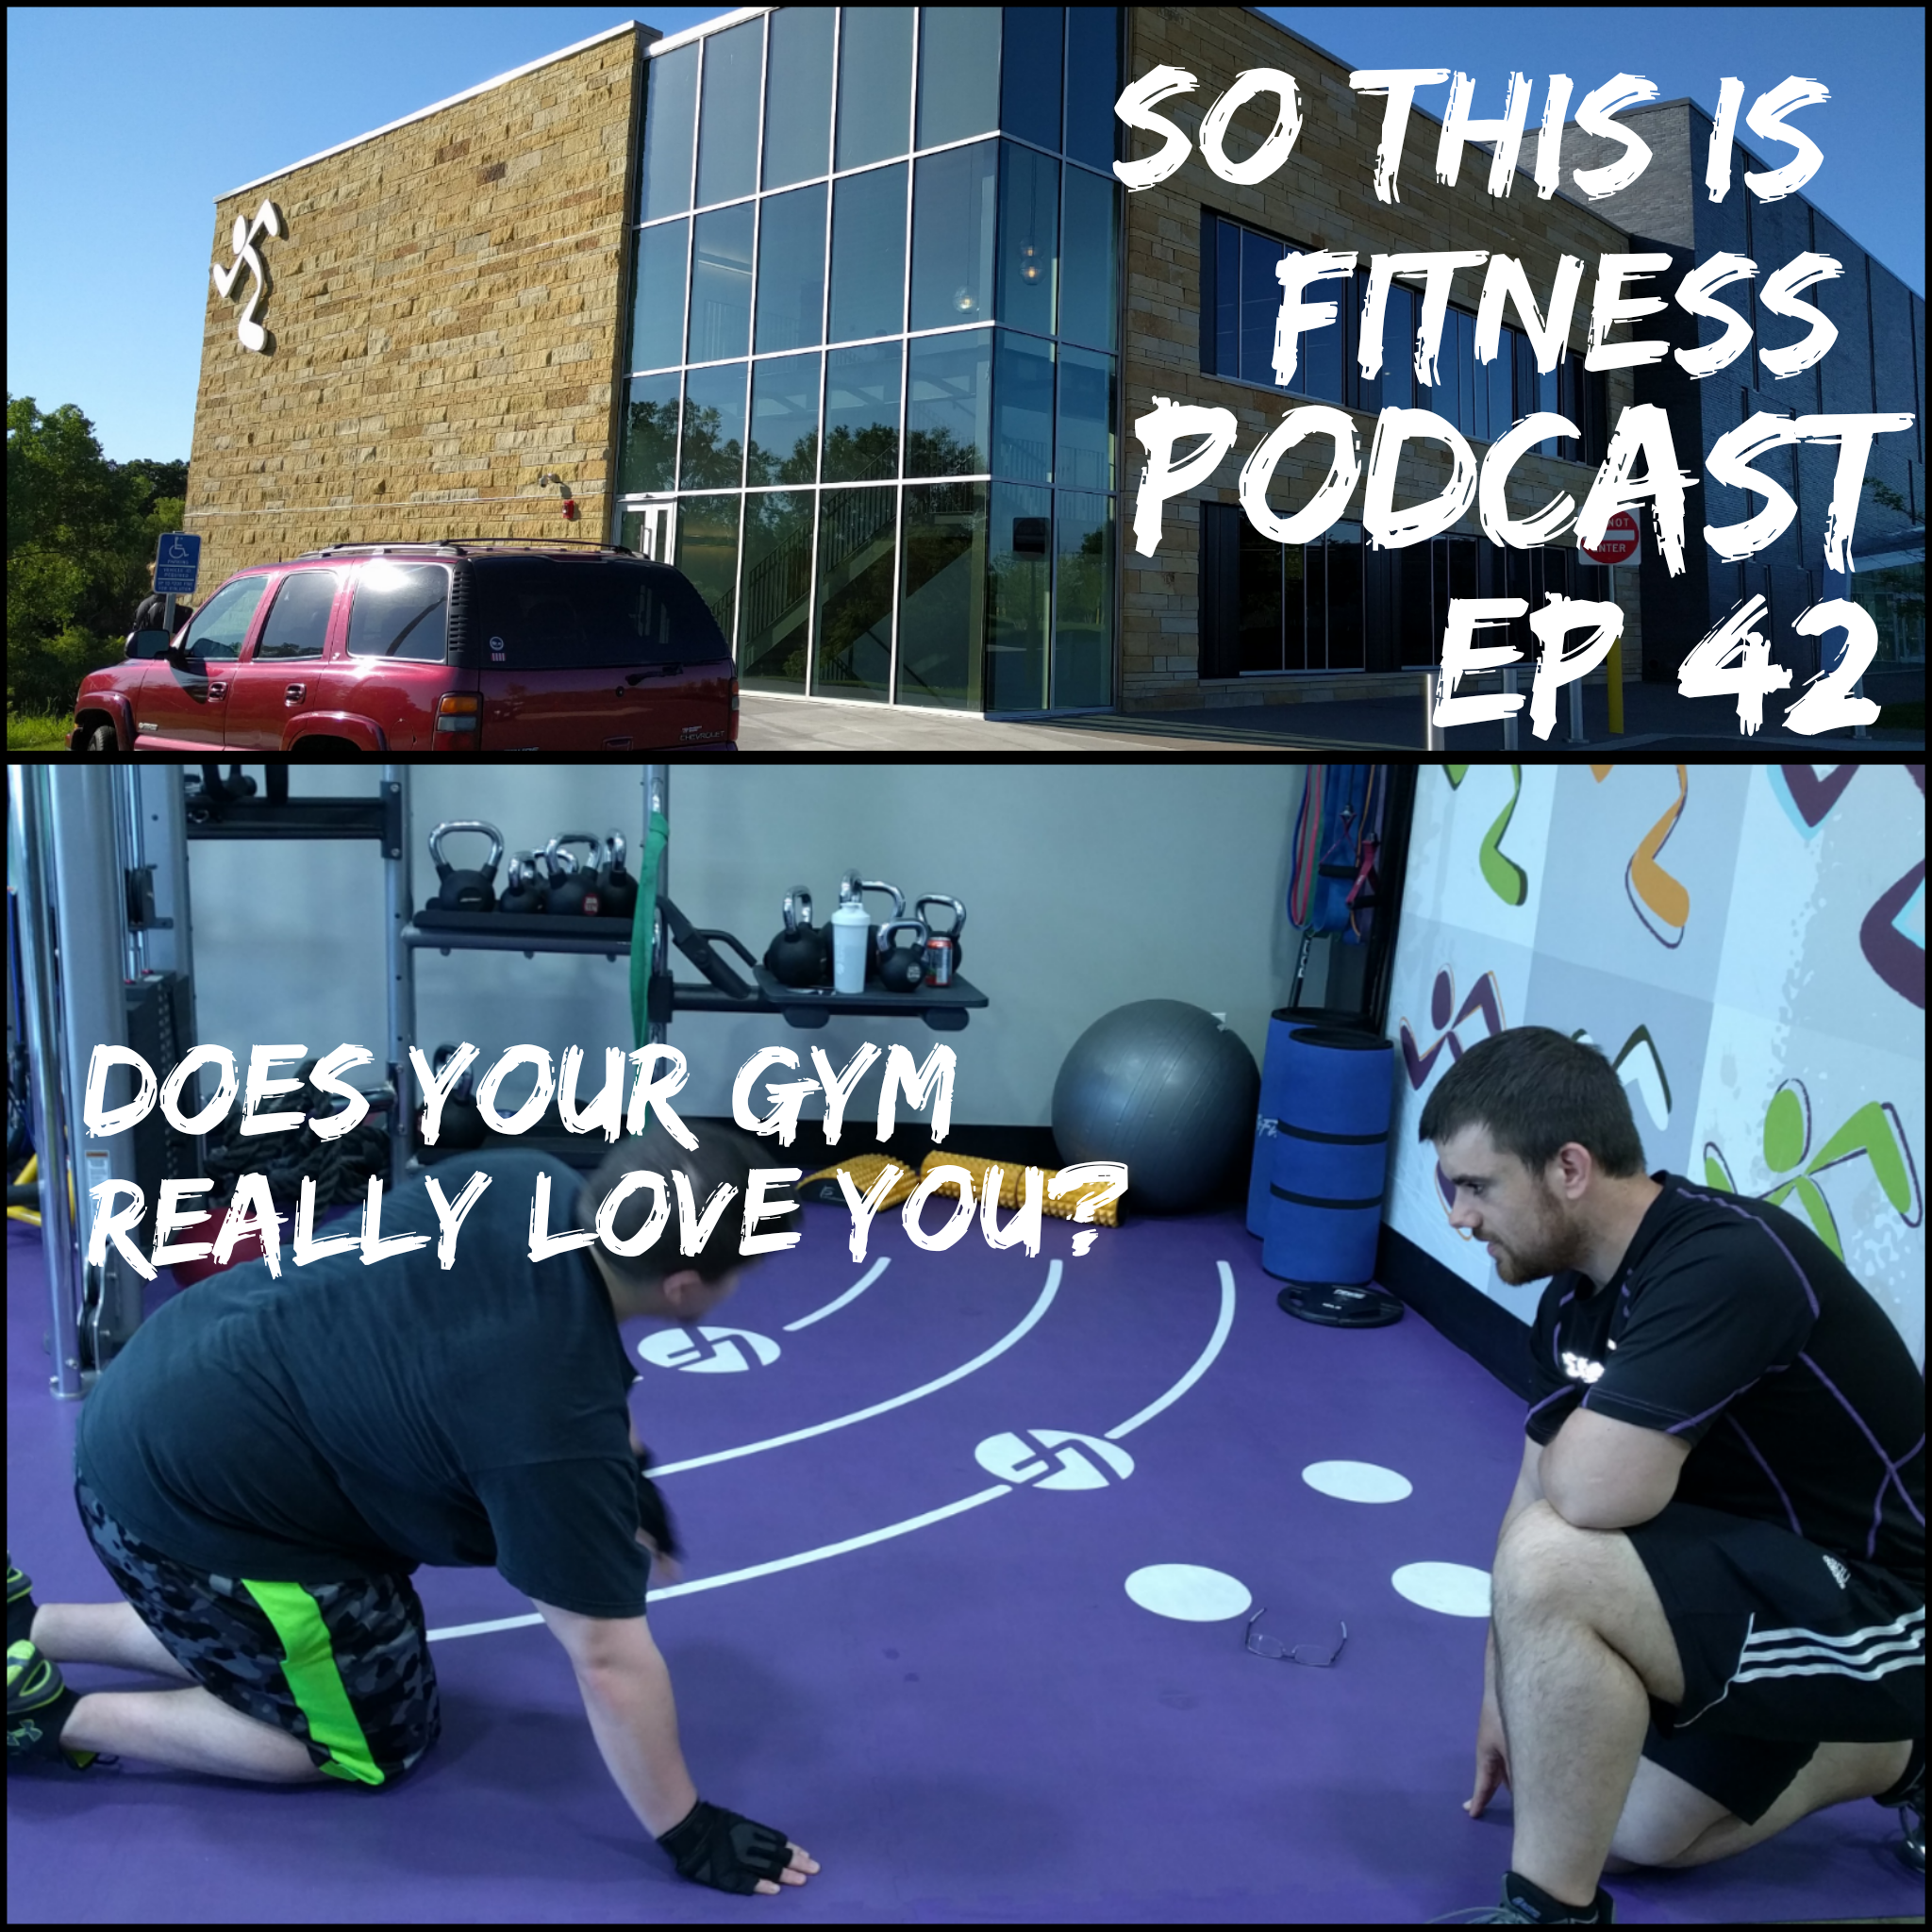 Does Your Gym REALLY Love You? (Podcast #42)